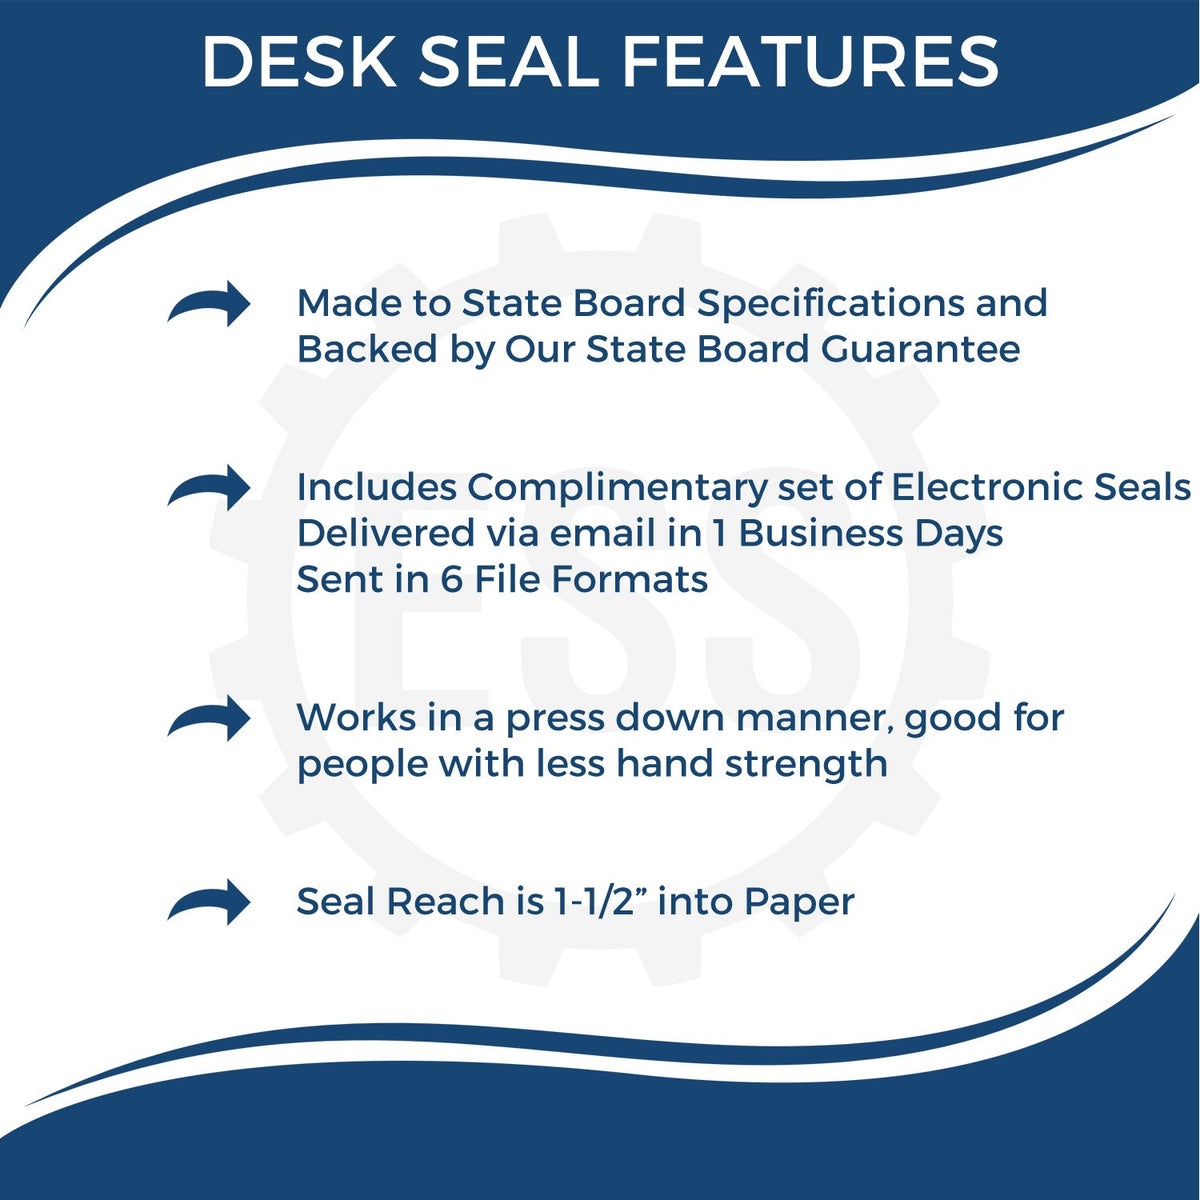 A picture of an infographic highlighting the selling points for the Tennessee Engineer Desk Seal